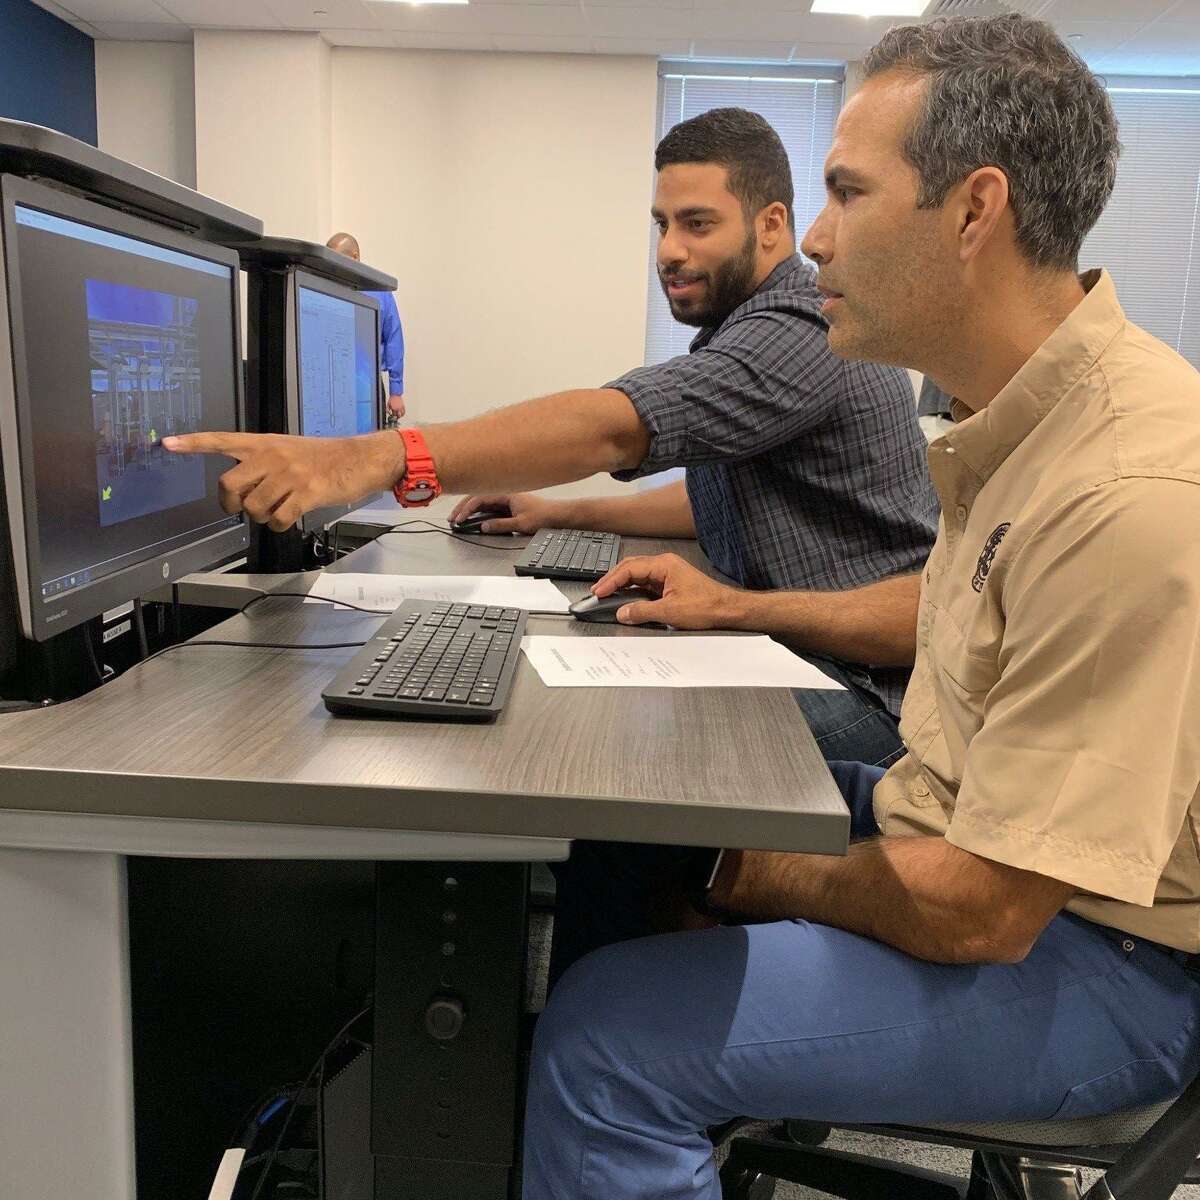 Land Commissioner George P. Bush visited the Lone Star College Process Technology Center in Generation Park near Atascocita. The facility is a part of the Lone Star College Kingwood system.